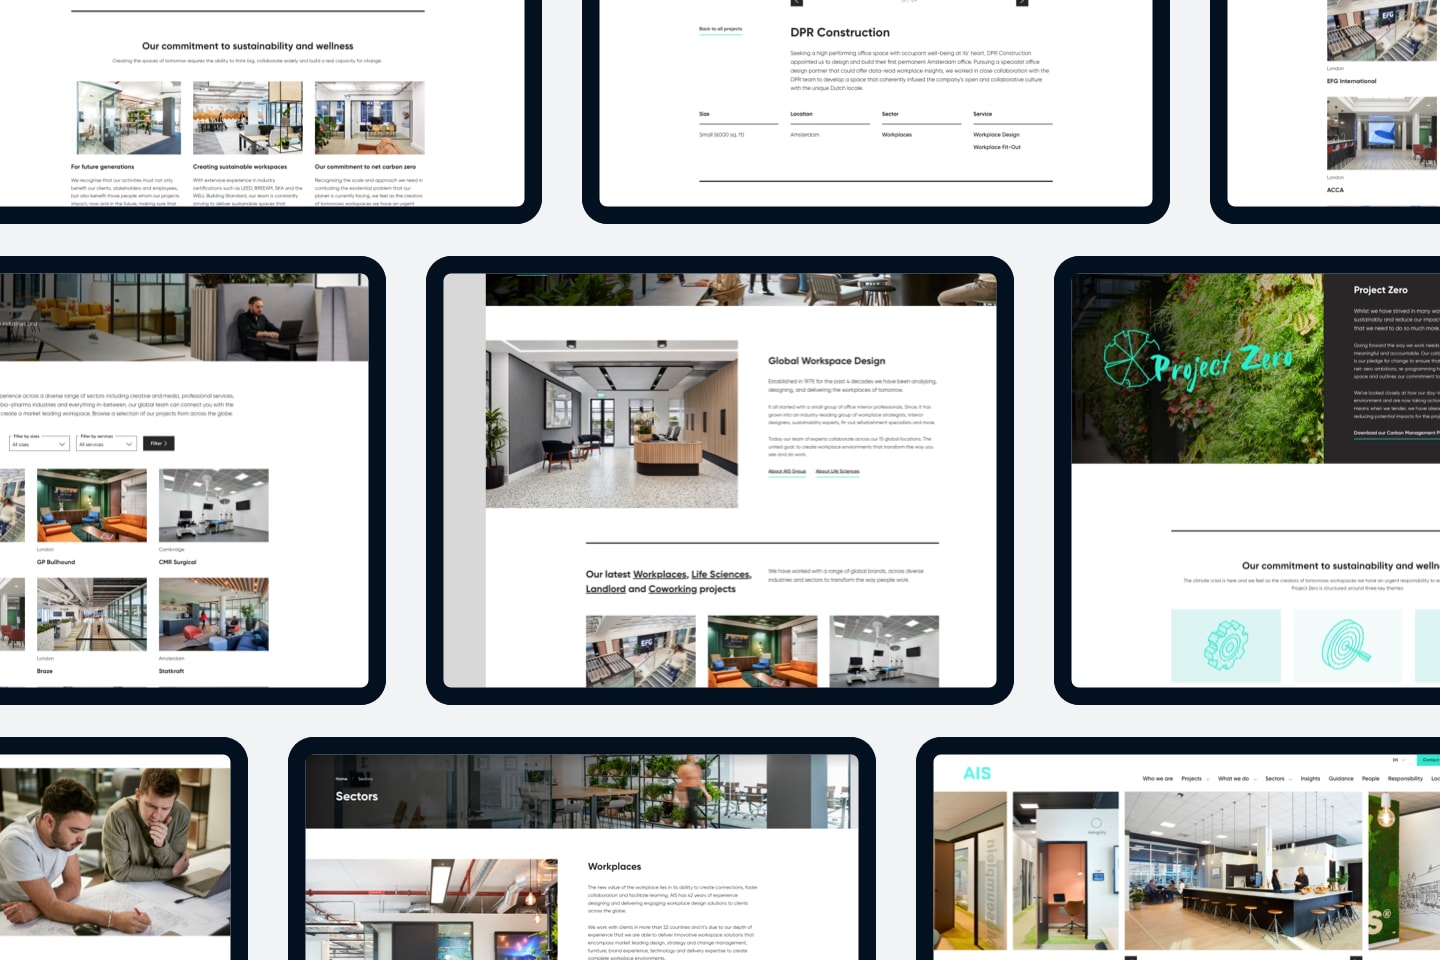 Various pages from the AIS website redesign show tiled.